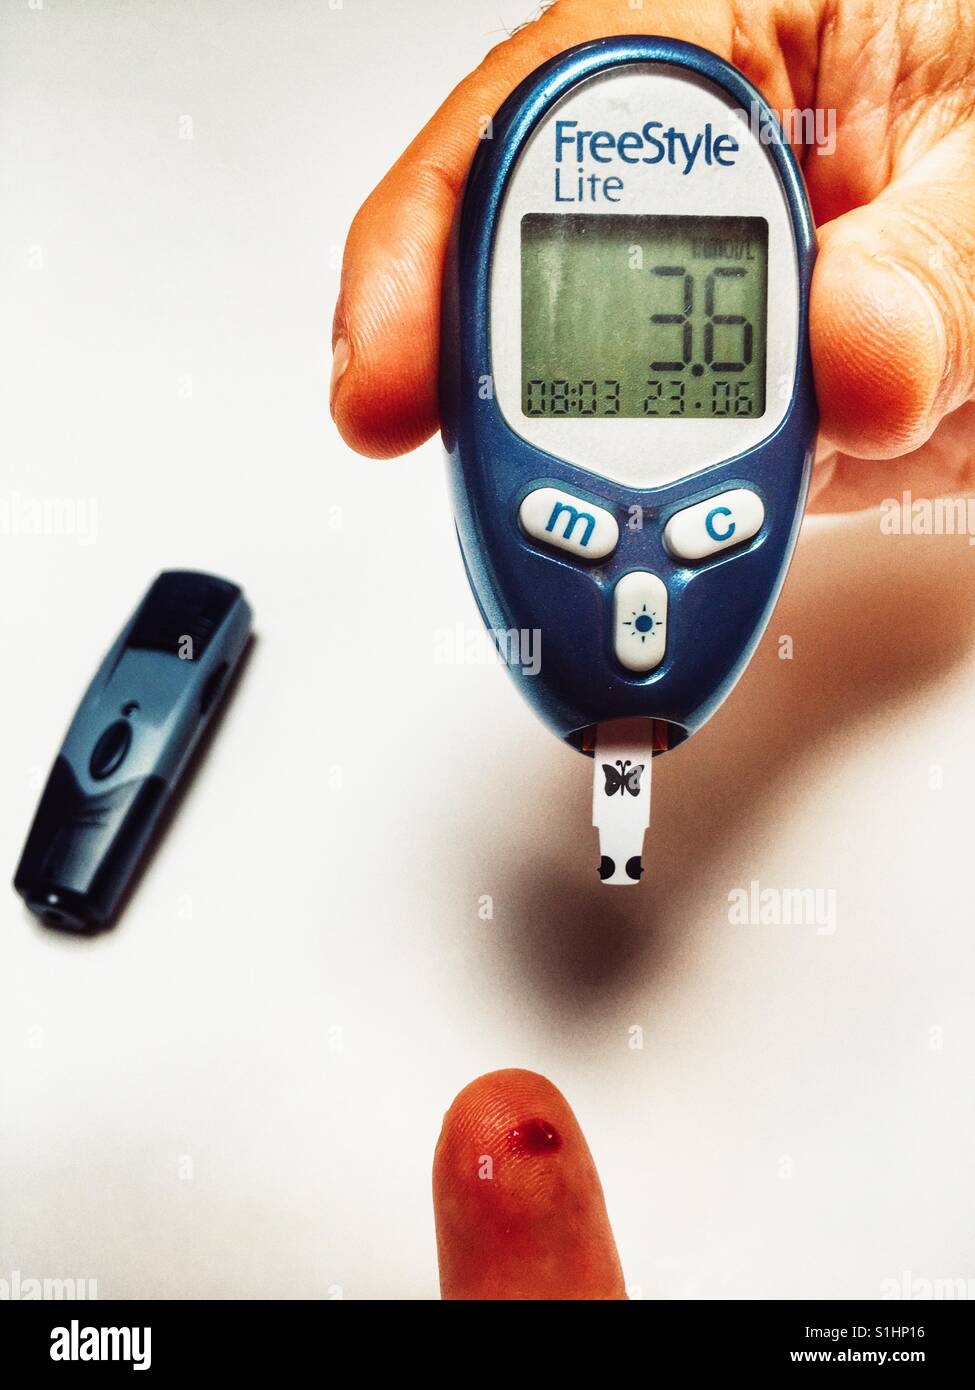 https://c8.alamy.com/comp/S1HP16/blood-glucose-monitor-showing-a-reading-of-36-of-a-diabetic-patient-S1HP16.jpg